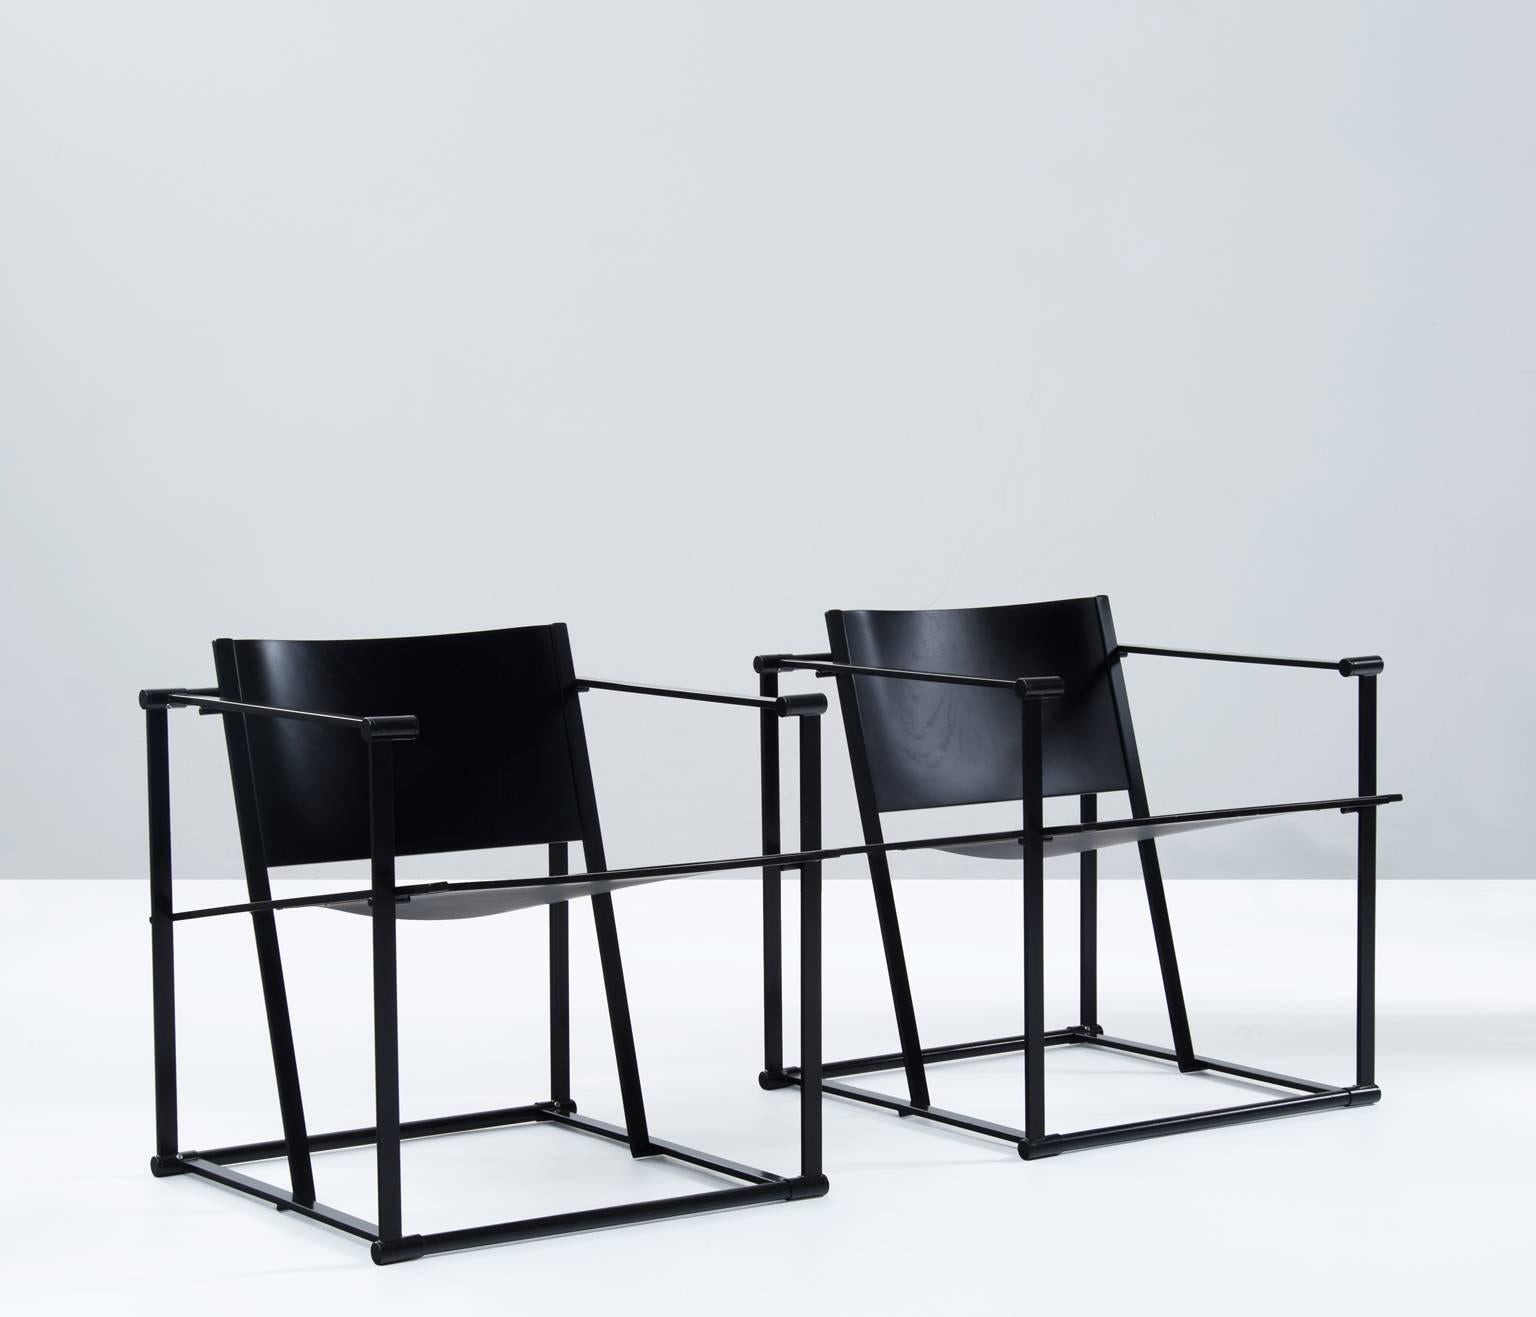 Set of two 'Cube' lounge chairs designed by Radboud van Beekum for Pastoe, the Netherlands 1980s.

Made of a black lacquered metal frame and black painted wooden seat and back. Sculptural design with a very comfortable seat. 

This chair was